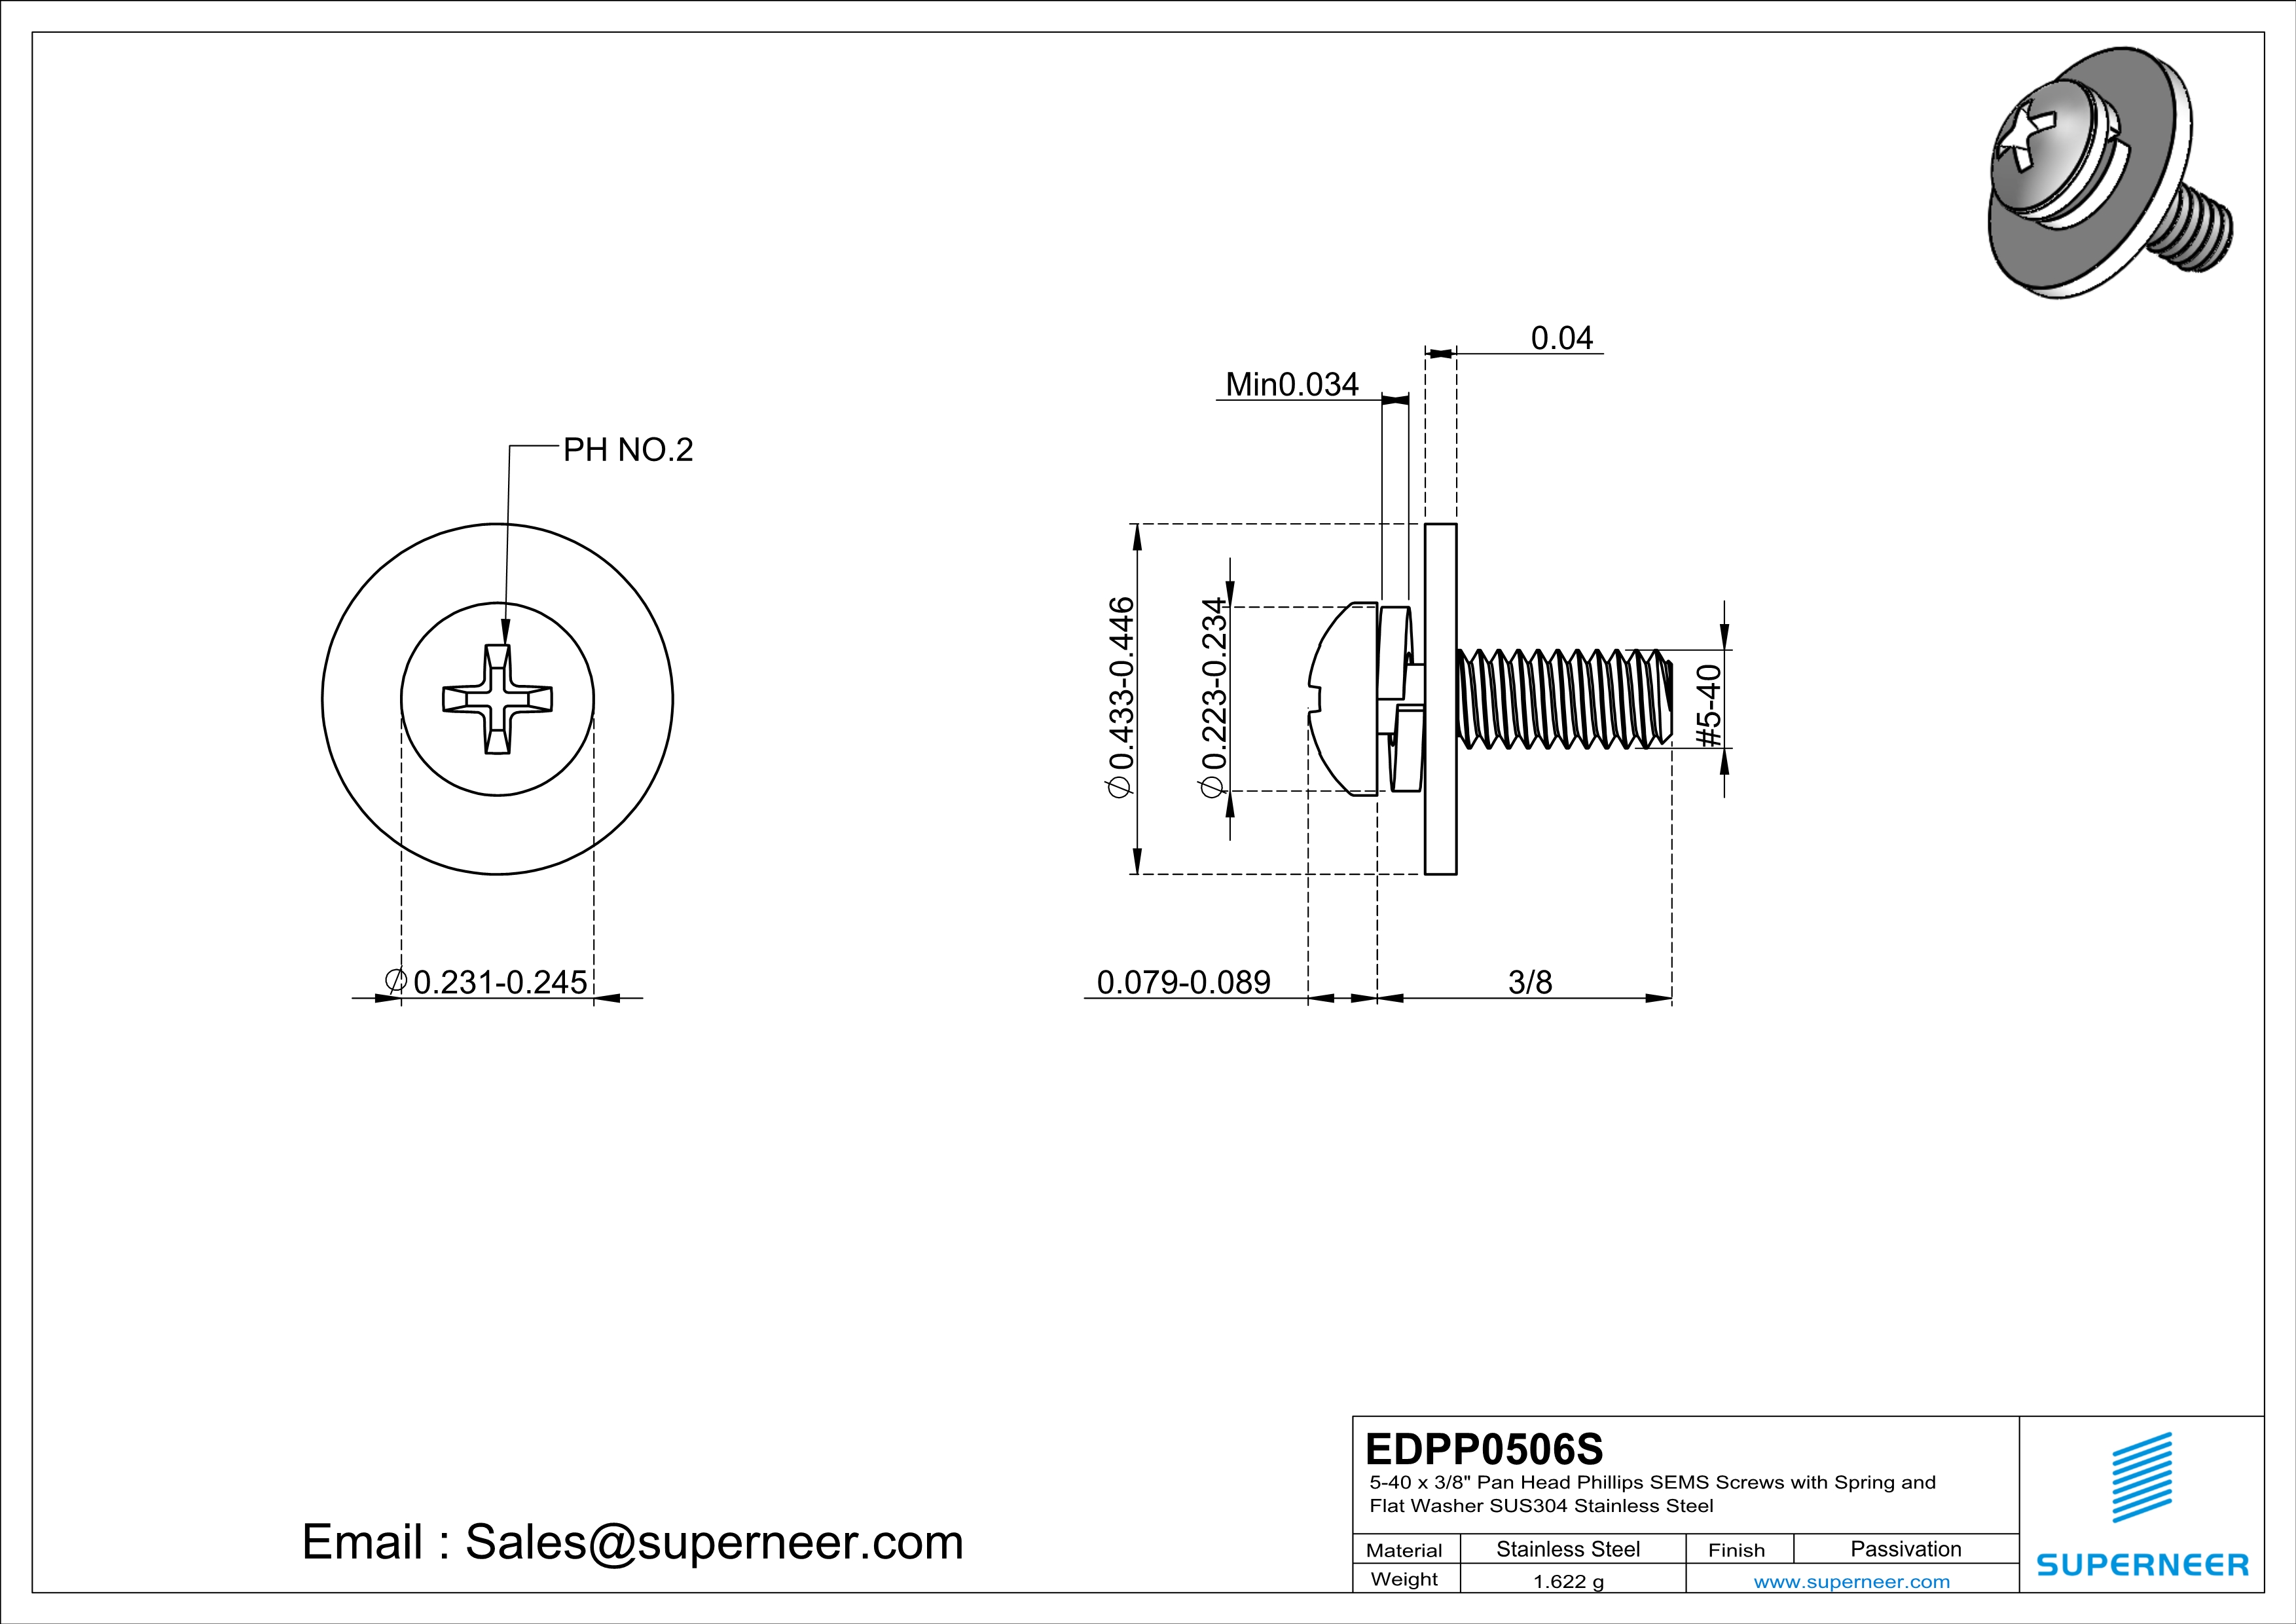 5-40 x 3/8" Pan Head Phillips SEMS Screws with Spring and Flat Washer SUS304 Stainless Steel Inox